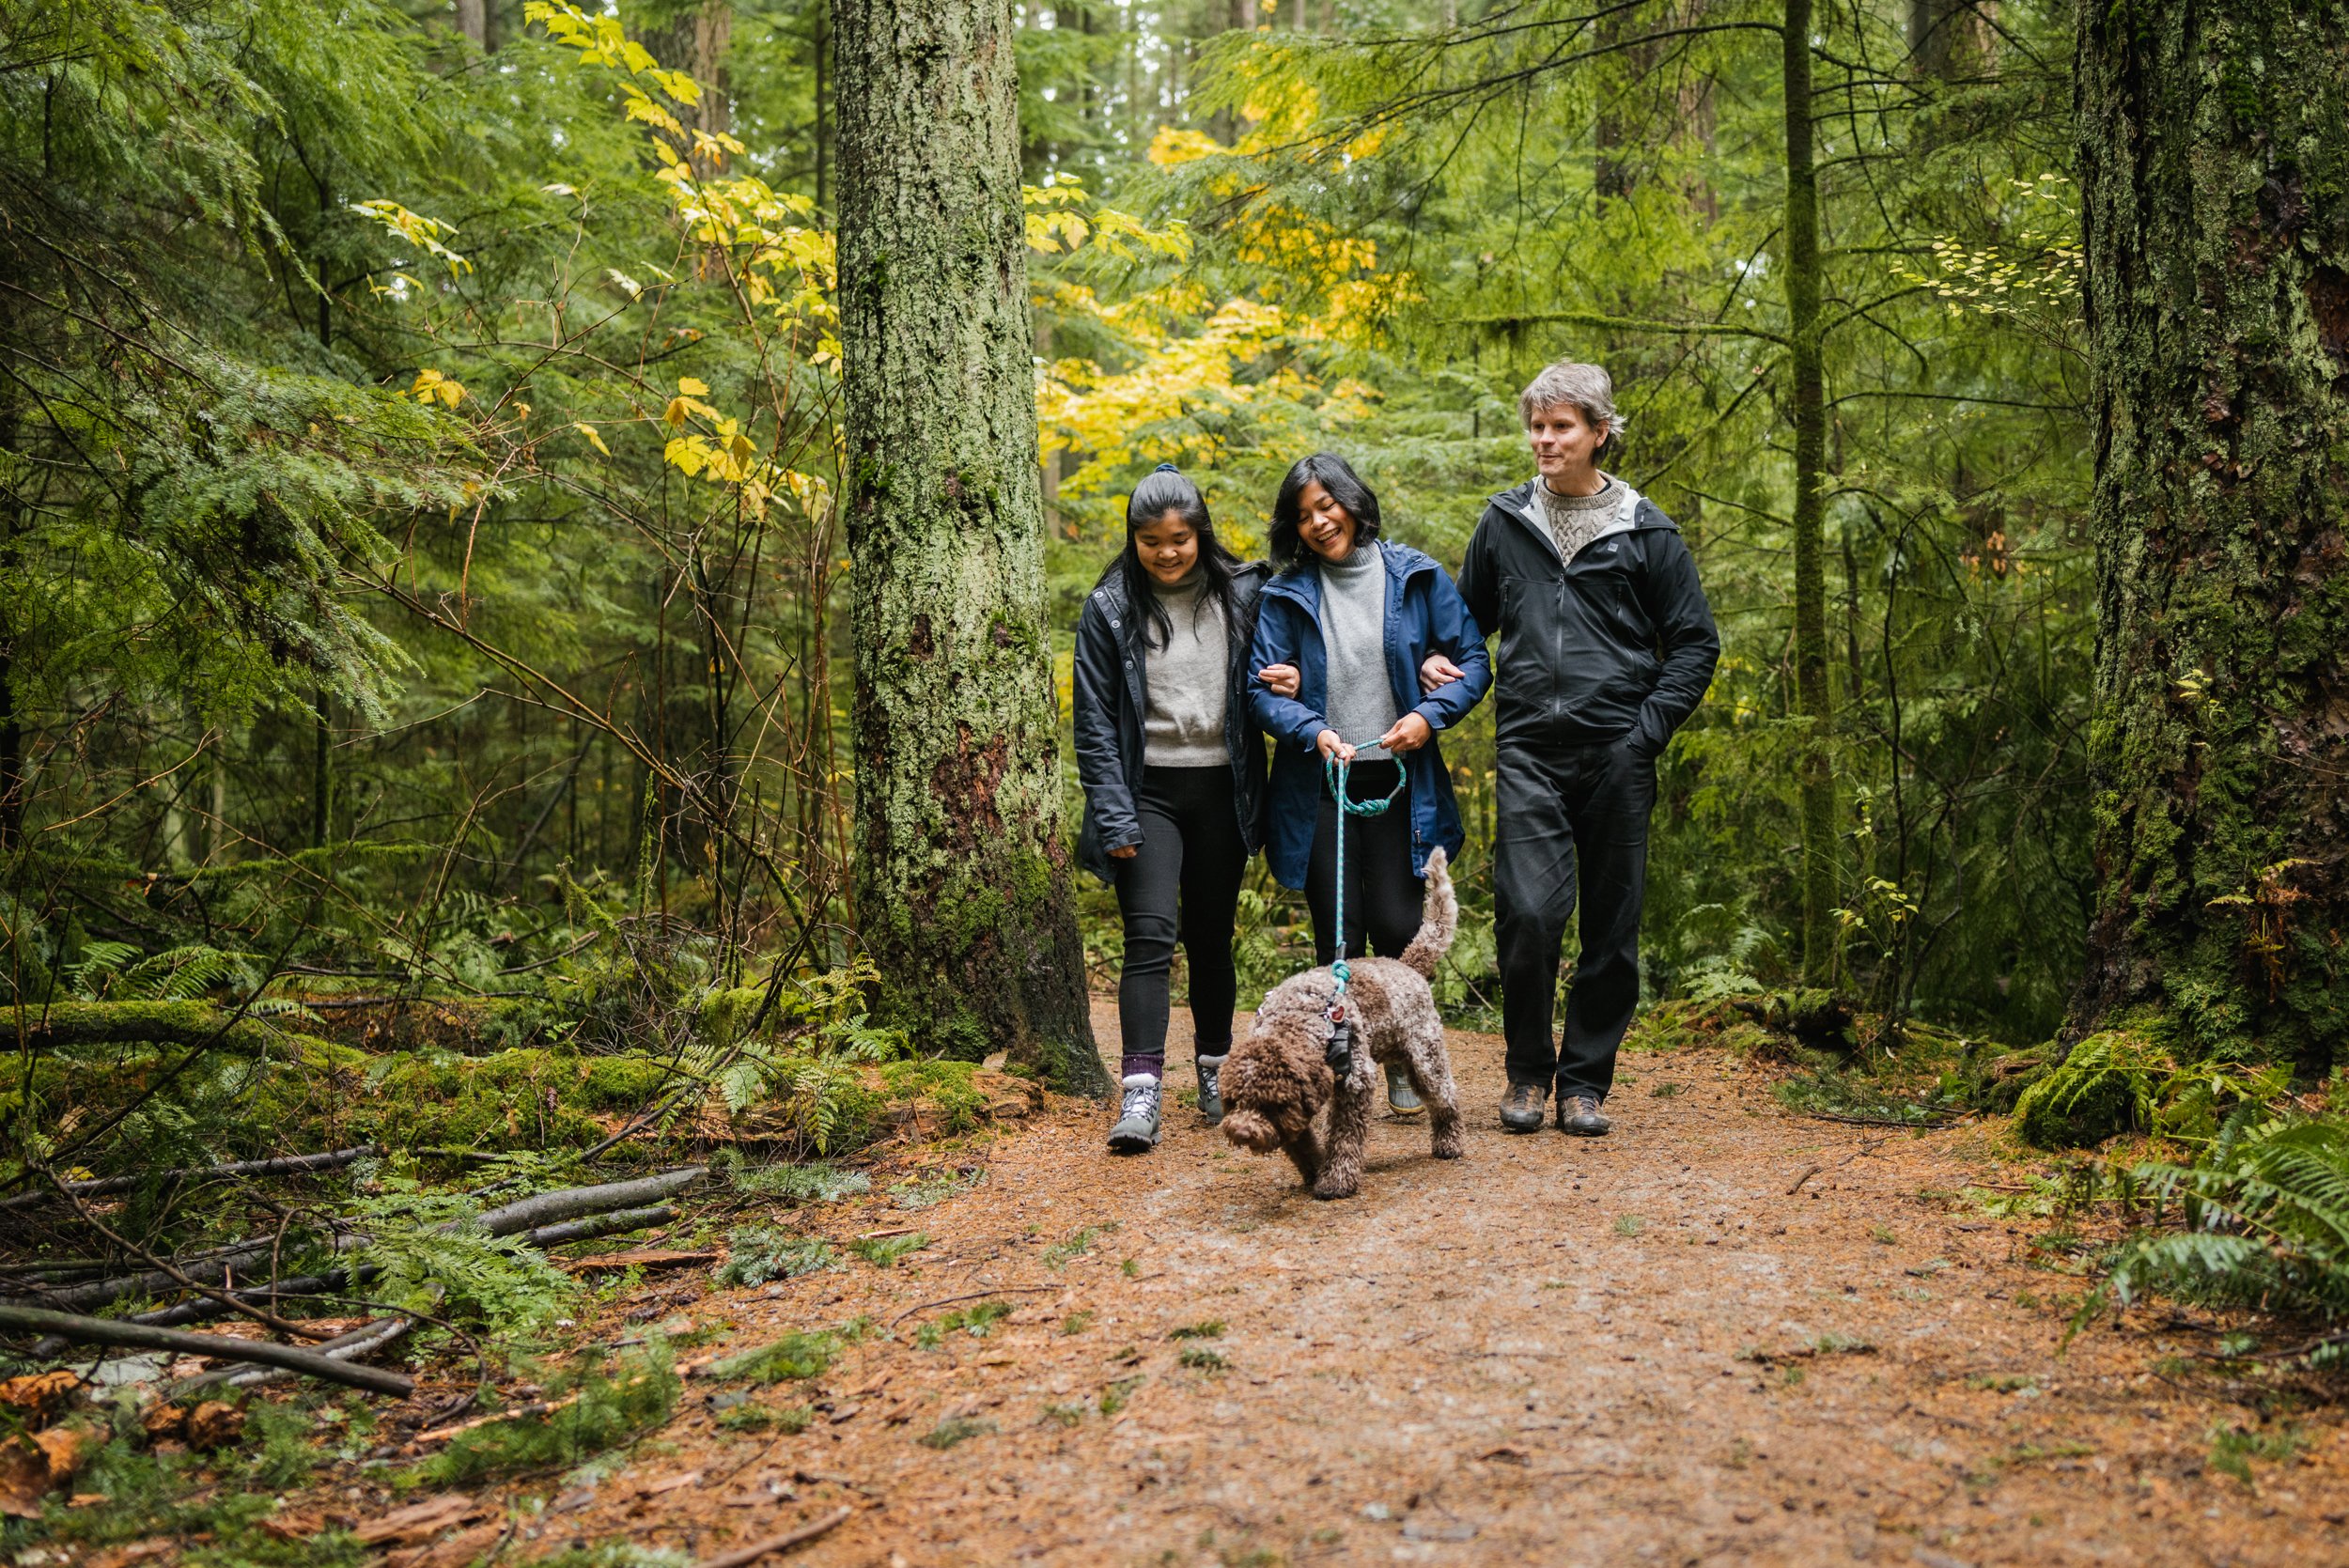 Family walking dog on forest path